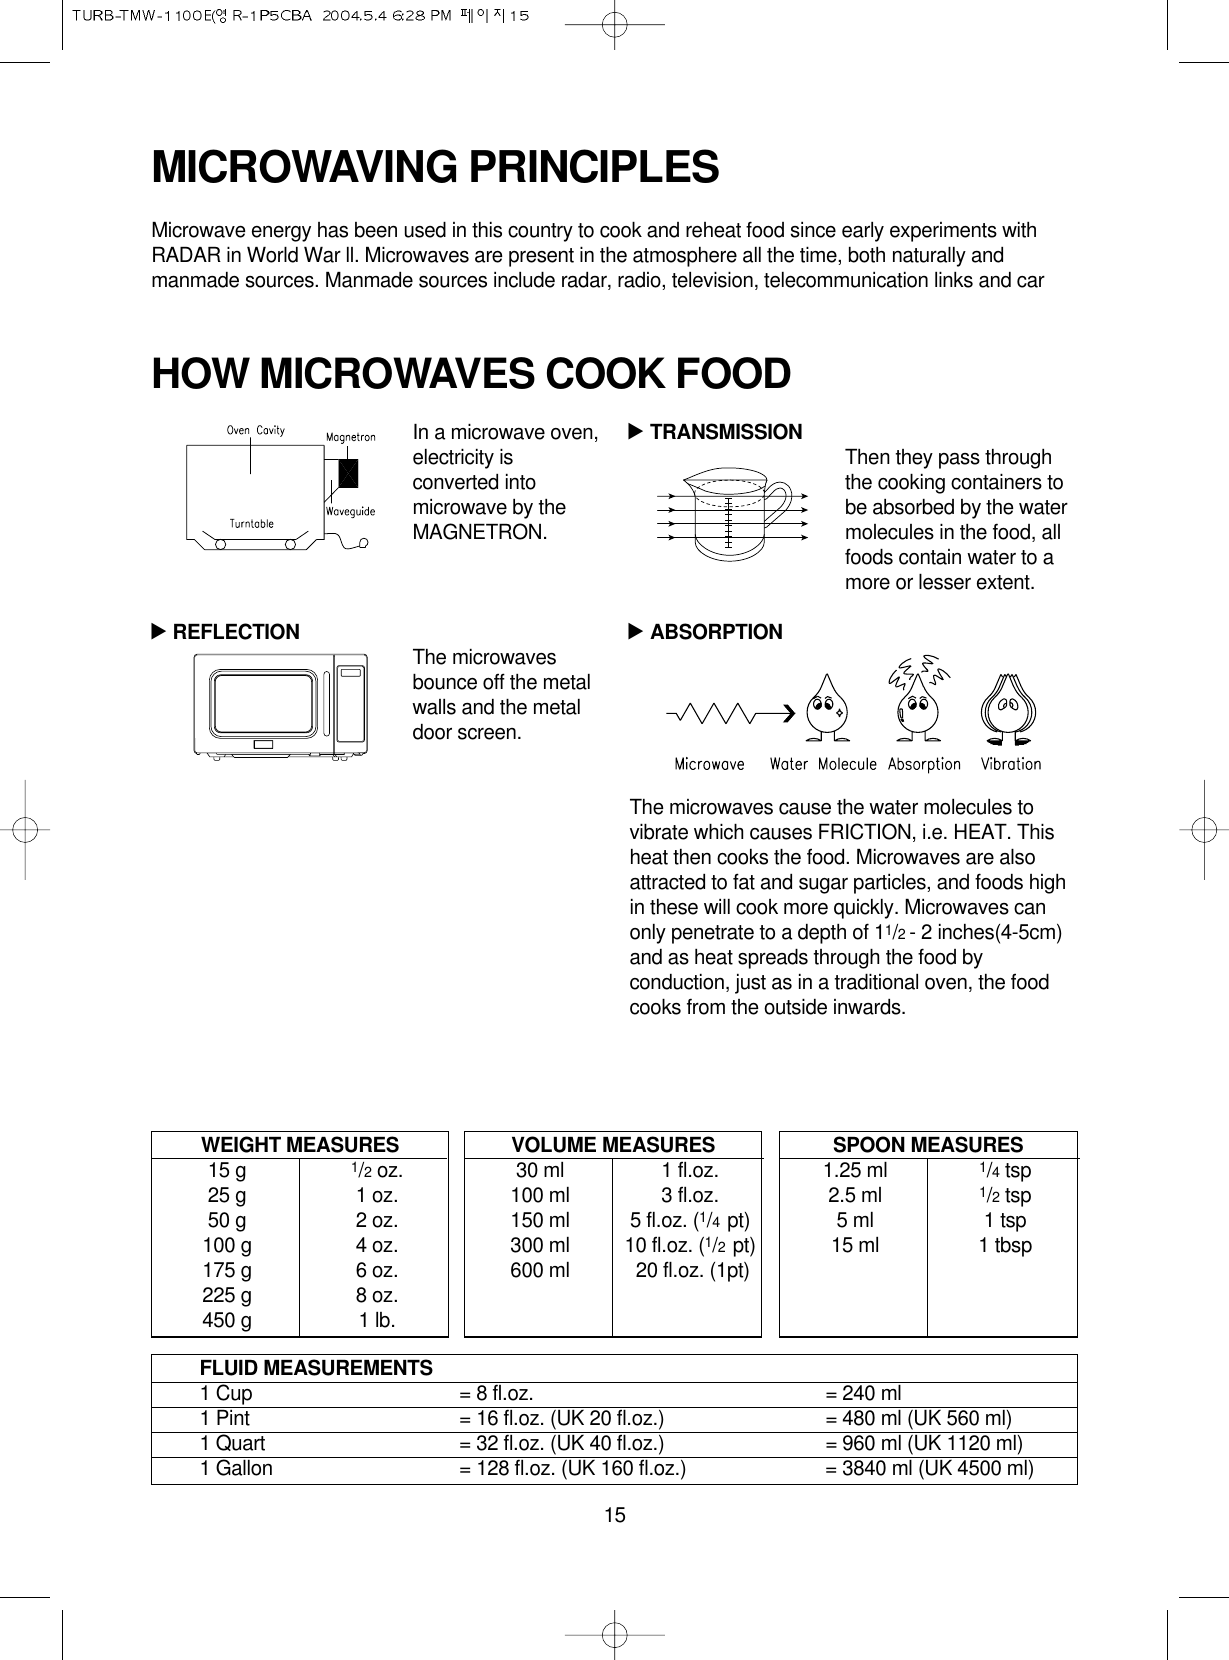 15MICROWAVING PRINCIPLESMicrowave energy has been used in this country to cook and reheat food since early experiments withRADAR in World War ll. Microwaves are present in the atmosphere all the time, both naturally andmanmade sources. Manmade sources include radar, radio, television, telecommunication links and carIn a microwave oven,electricity isconverted intomicrowave by theMAGNETRON.REFLECTION The microwavesbounce off the metalwalls and the metaldoor screen.TRANSMISSION Then they pass throughthe cooking containers tobe absorbed by the watermolecules in the food, allfoods contain water to amore or lesser extent.ABSORPTIONThe microwaves cause the water molecules tovibrate which causes FRICTION, i.e. HEAT. Thisheat then cooks the food. Microwaves are alsoattracted to fat and sugar particles, and foods highin these will cook more quickly. Microwaves canonly penetrate to a depth of 11/2 - 2 inches(4-5cm)and as heat spreads through the food byconduction, just as in a traditional oven, the foodcooks from the outside inwards.WEIGHT MEASURES15 g 1/2oz.25 g 1 oz.50 g 2 oz.100 g 4 oz.175 g 6 oz.225 g 8 oz.450 g 1 lb.HOW MICROWAVES COOK FOOD▲▲▲VOLUME MEASURES30 ml 1 fl.oz.100 ml 3 fl.oz.150 ml 5 fl.oz. (1/4  pt)300 ml 10 fl.oz. (1/2  pt)600 ml 20 fl.oz. (1pt)SPOON MEASURES1.25 ml 1/4tsp2.5 ml 1/2tsp5 ml 1 tsp15 ml 1 tbspFLUID MEASUREMENTS1 Cup = 8 fl.oz. = 240 ml1 Pint = 16 fl.oz. (UK 20 fl.oz.) = 480 ml (UK 560 ml)1 Quart = 32 fl.oz. (UK 40 fl.oz.) = 960 ml (UK 1120 ml)1 Gallon = 128 fl.oz. (UK 160 fl.oz.) = 3840 ml (UK 4500 ml)